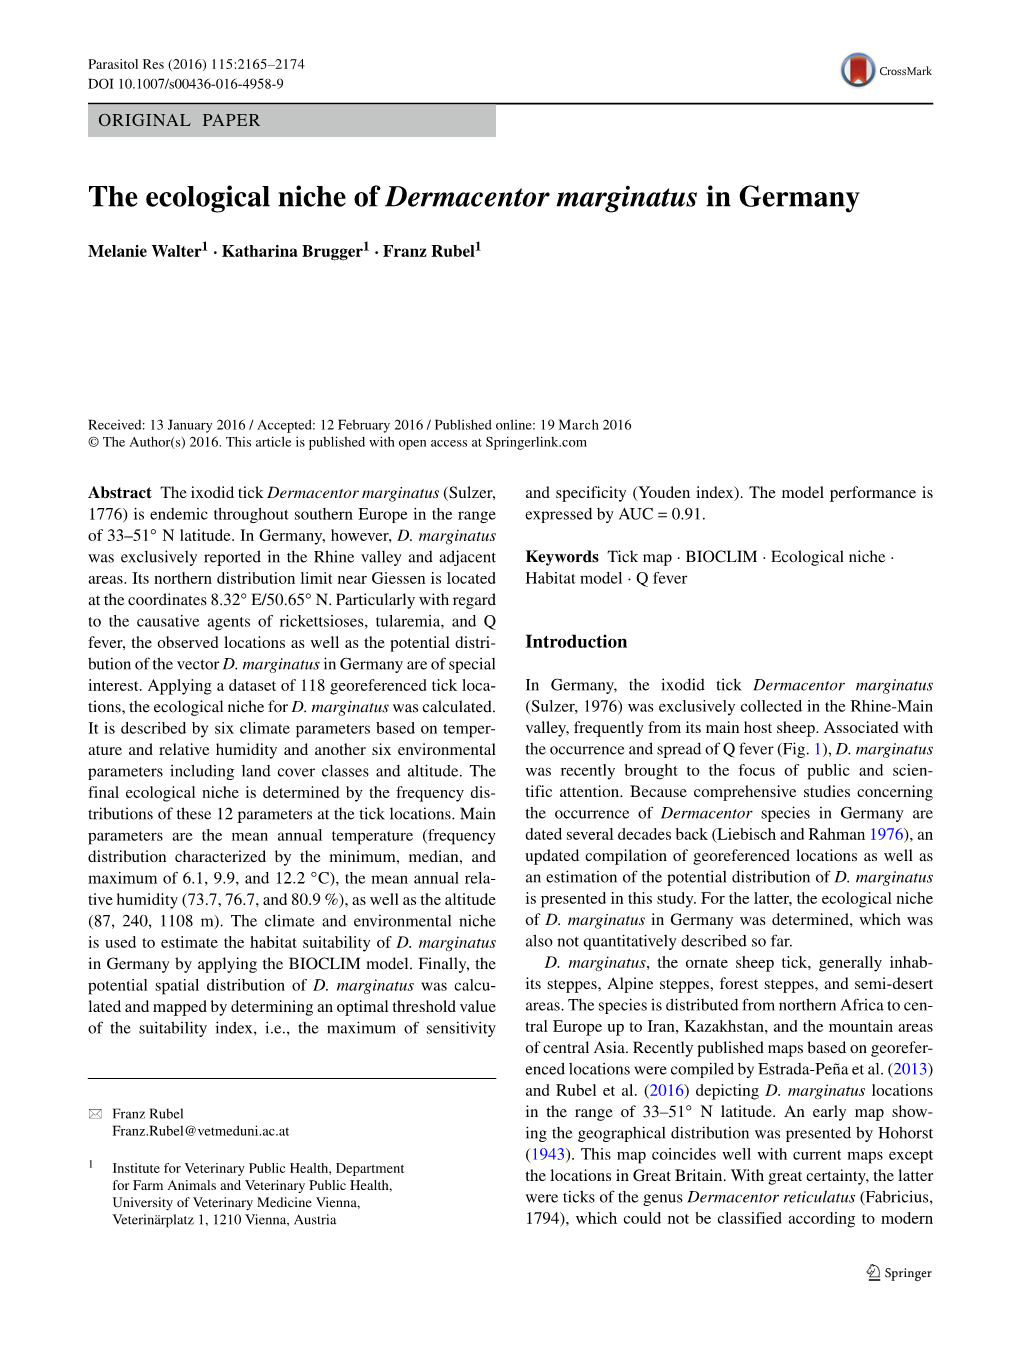 The Ecological Niche of Dermacentor Marginatus in Germany